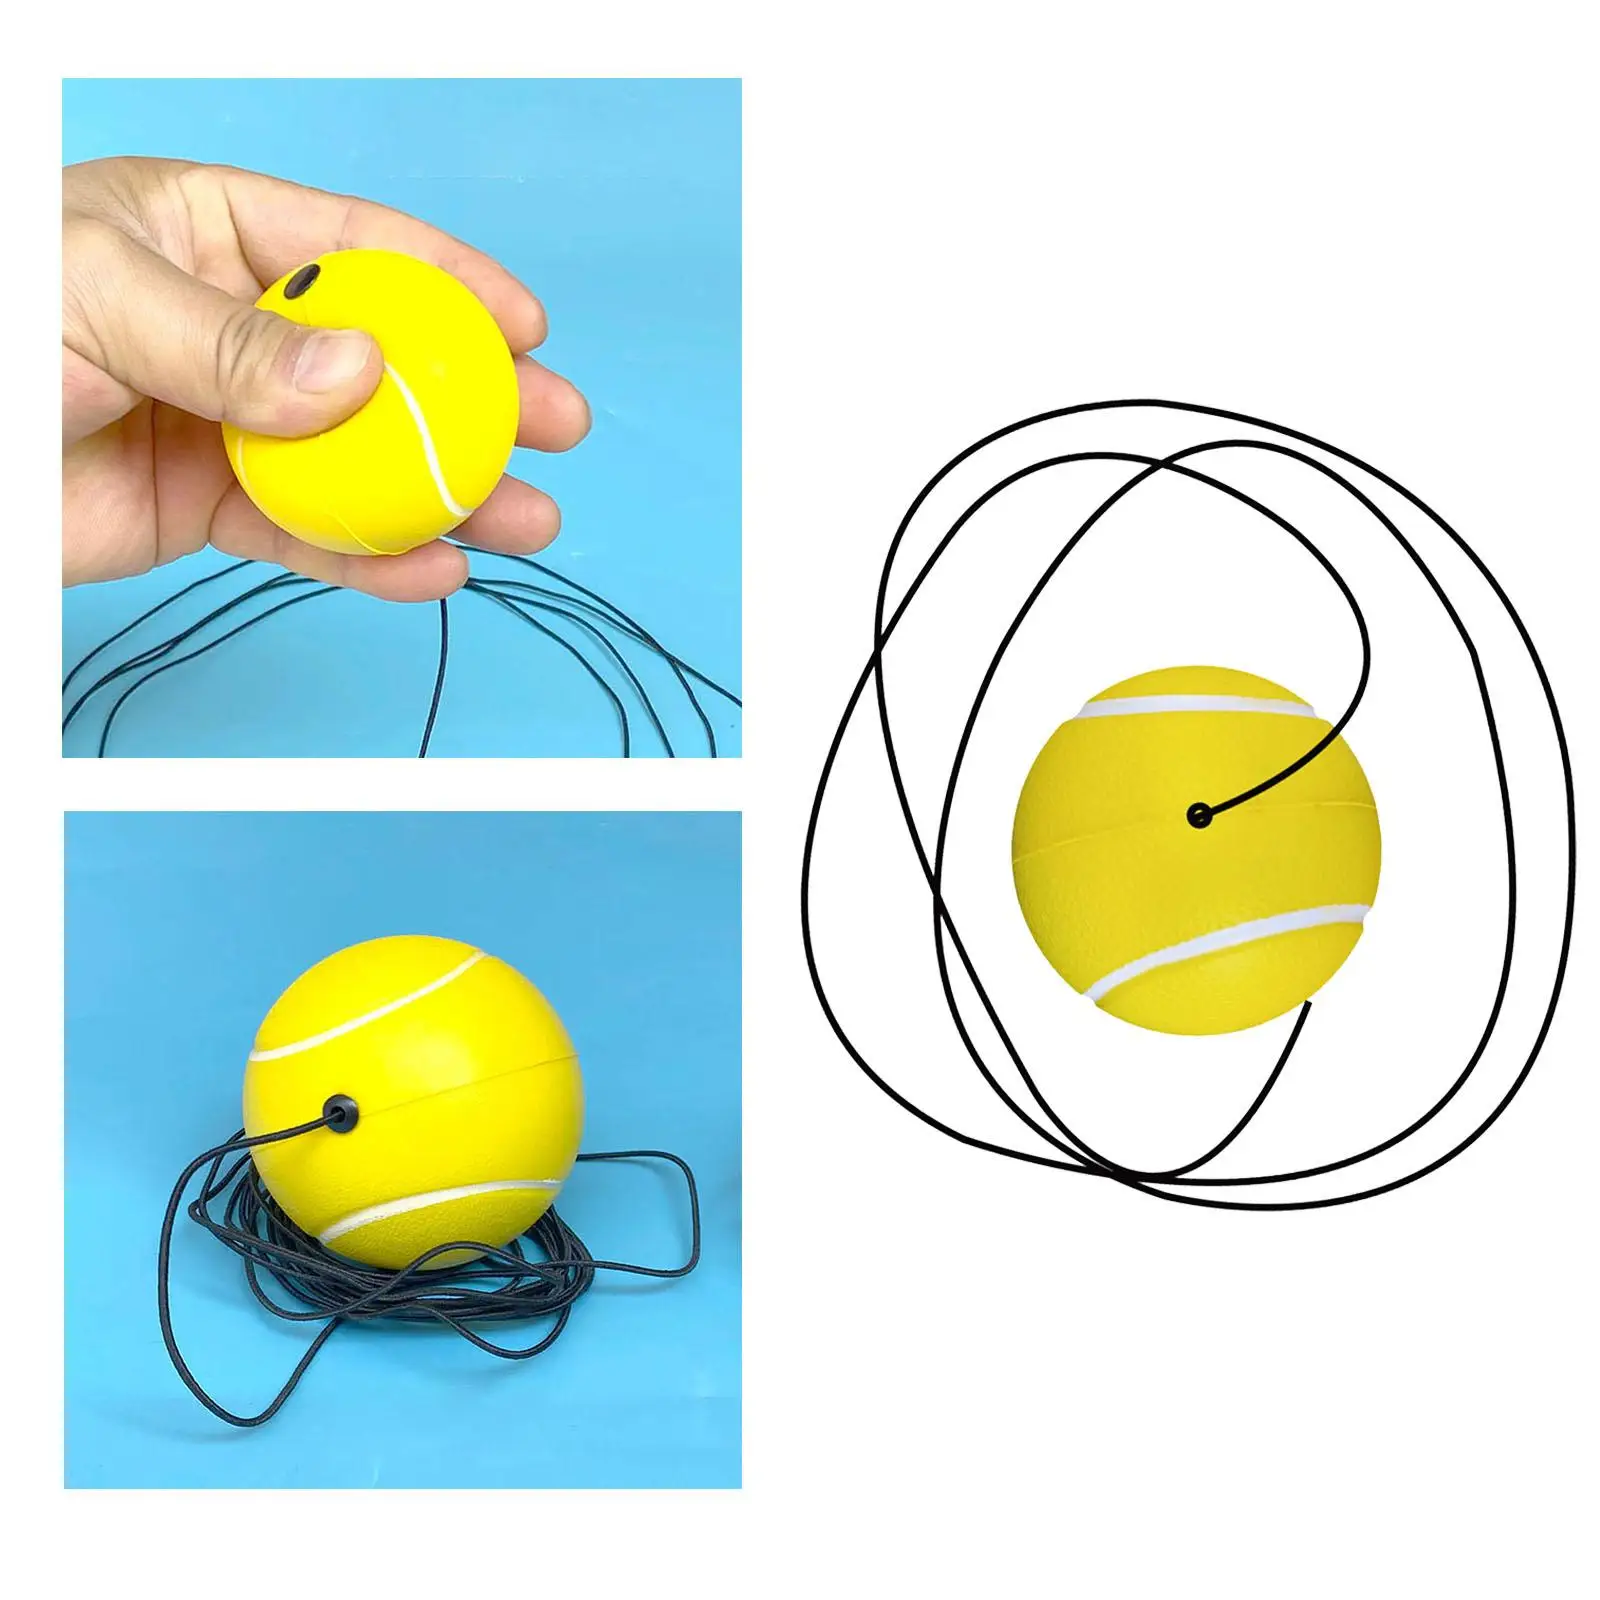 Tennis Ball with String Trainer Tool Self Practice Elastic Durable for Tennis Trainer Single Practice Beginners Exercise Sport